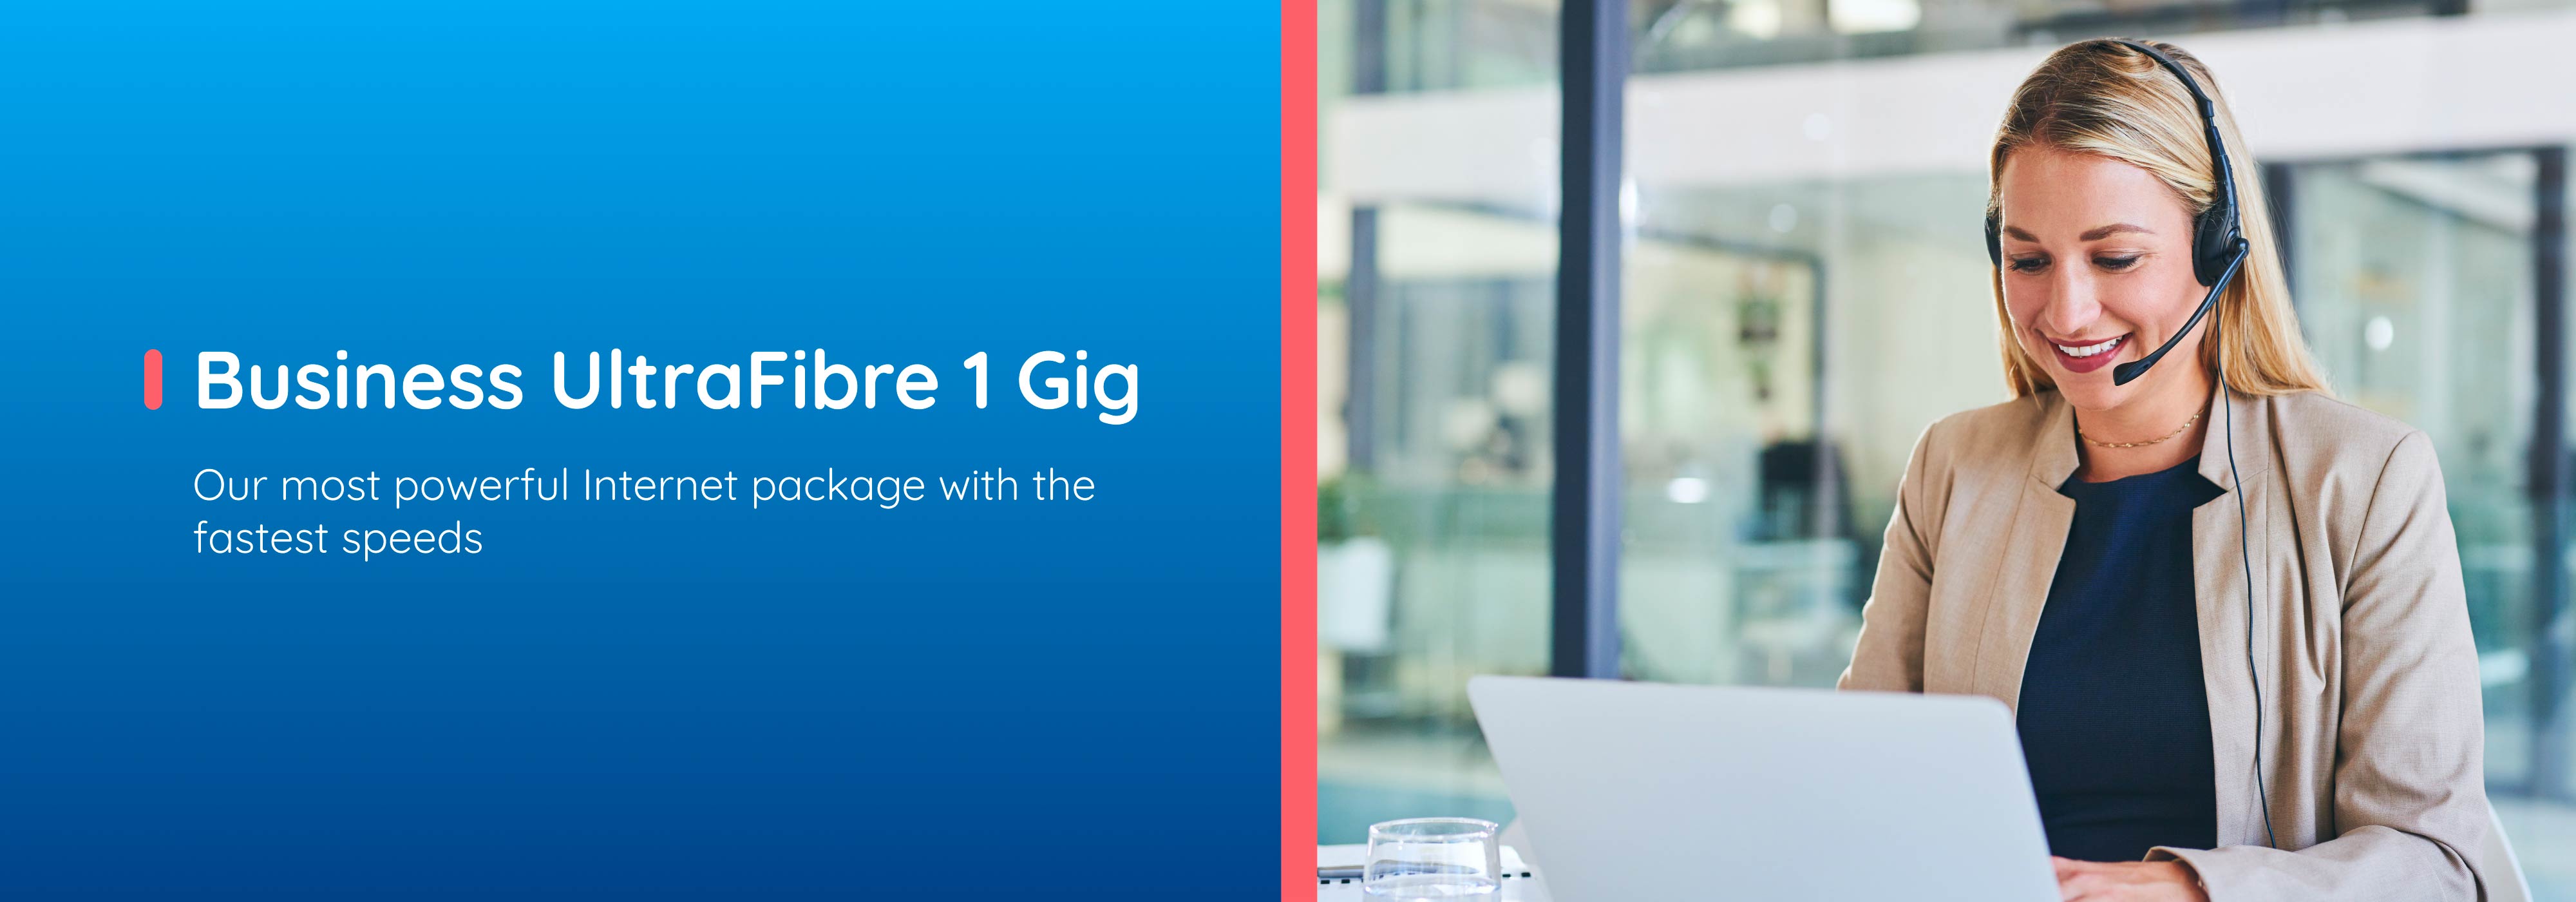 Business UltraFibre 1 Gig.Our most powerful Internet package with the fastest speeds